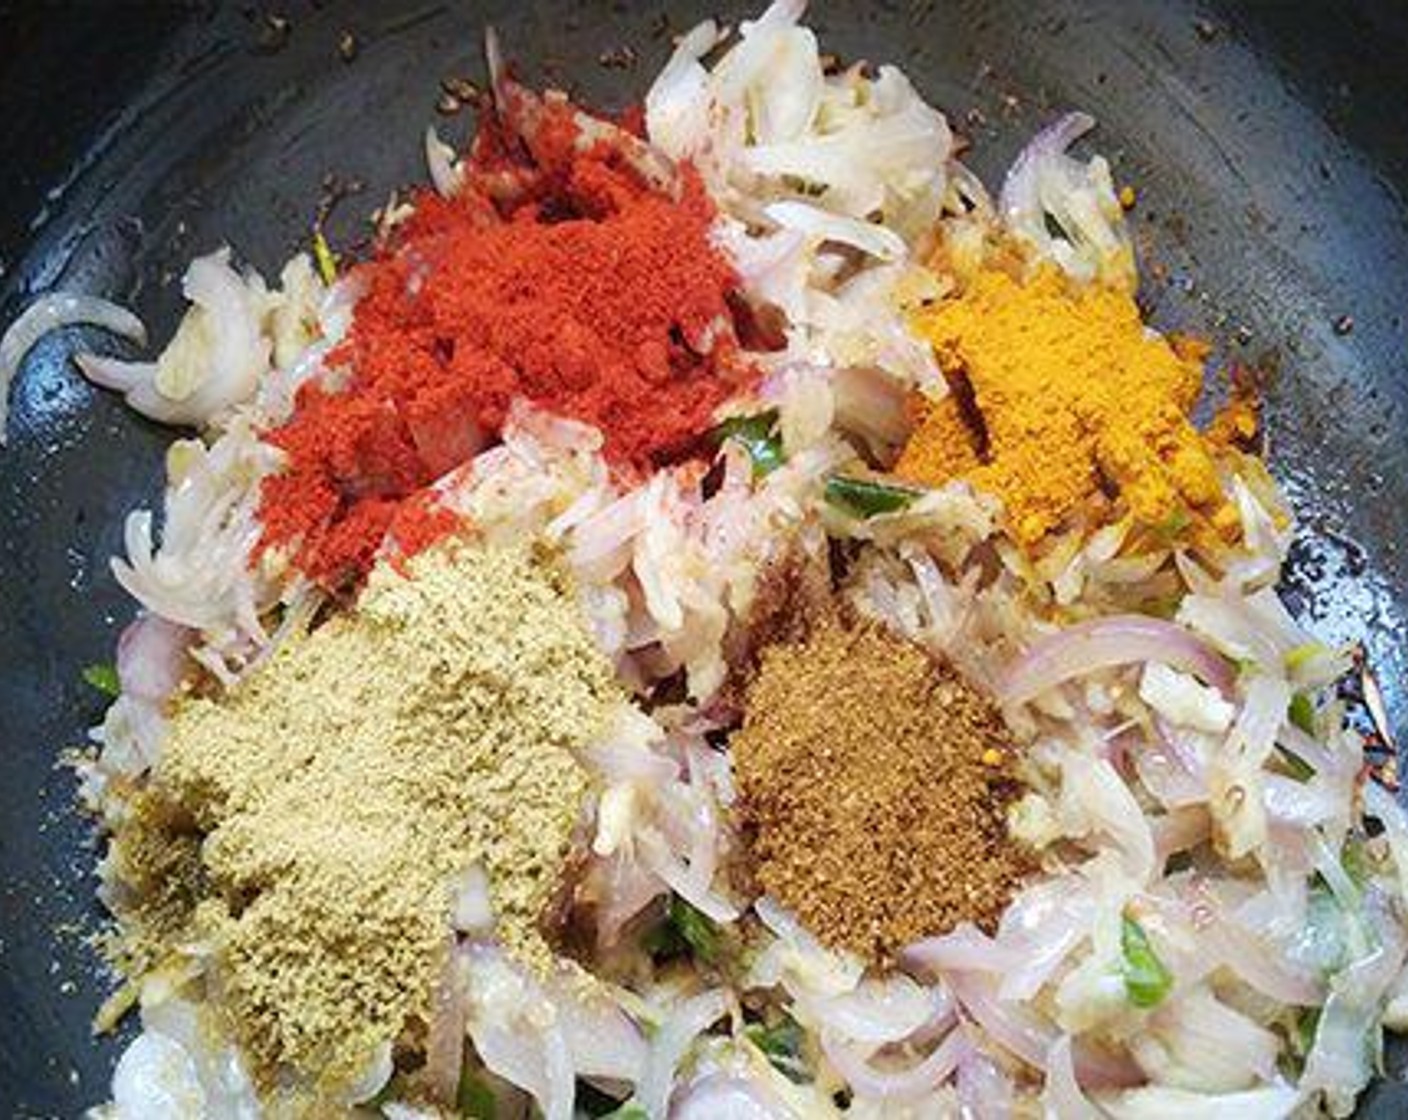 step 2 Sauté for a few minutes and add Chili Powder (1 tsp), Ground Turmeric (1/2 tsp), Garam Masala (1/2 tsp) and Fennel Seeds (1/2 tsp). Sauté until the smell of the spices is gone. Now add Tomatoes (2) and Salt (to taste).